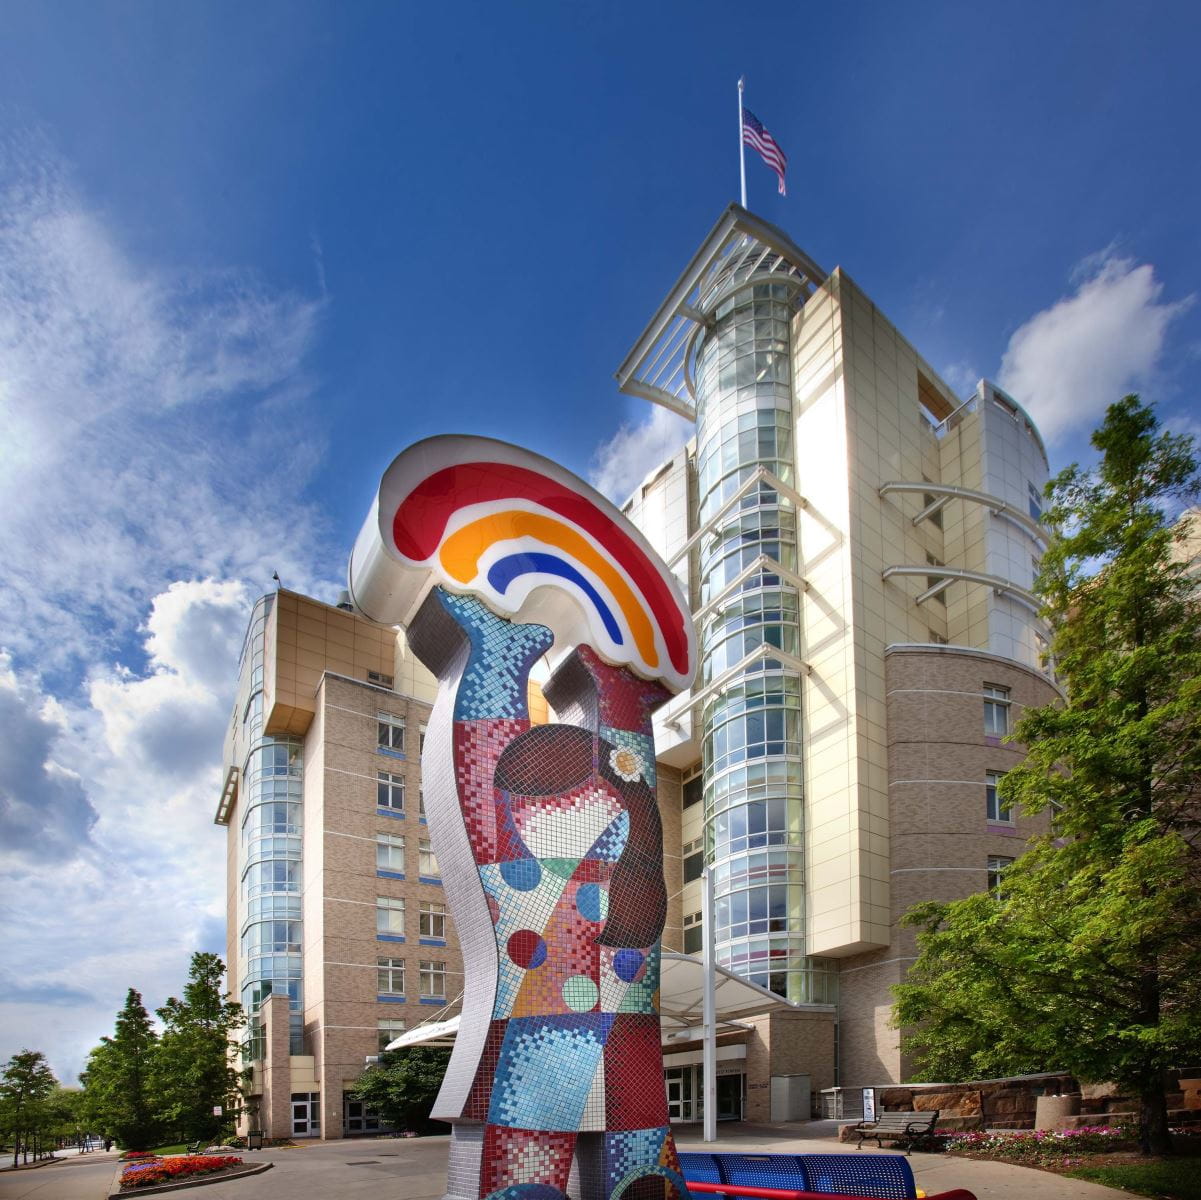 Outside the present-day University Hospitals Rainbow Babies & Children’s Hospital